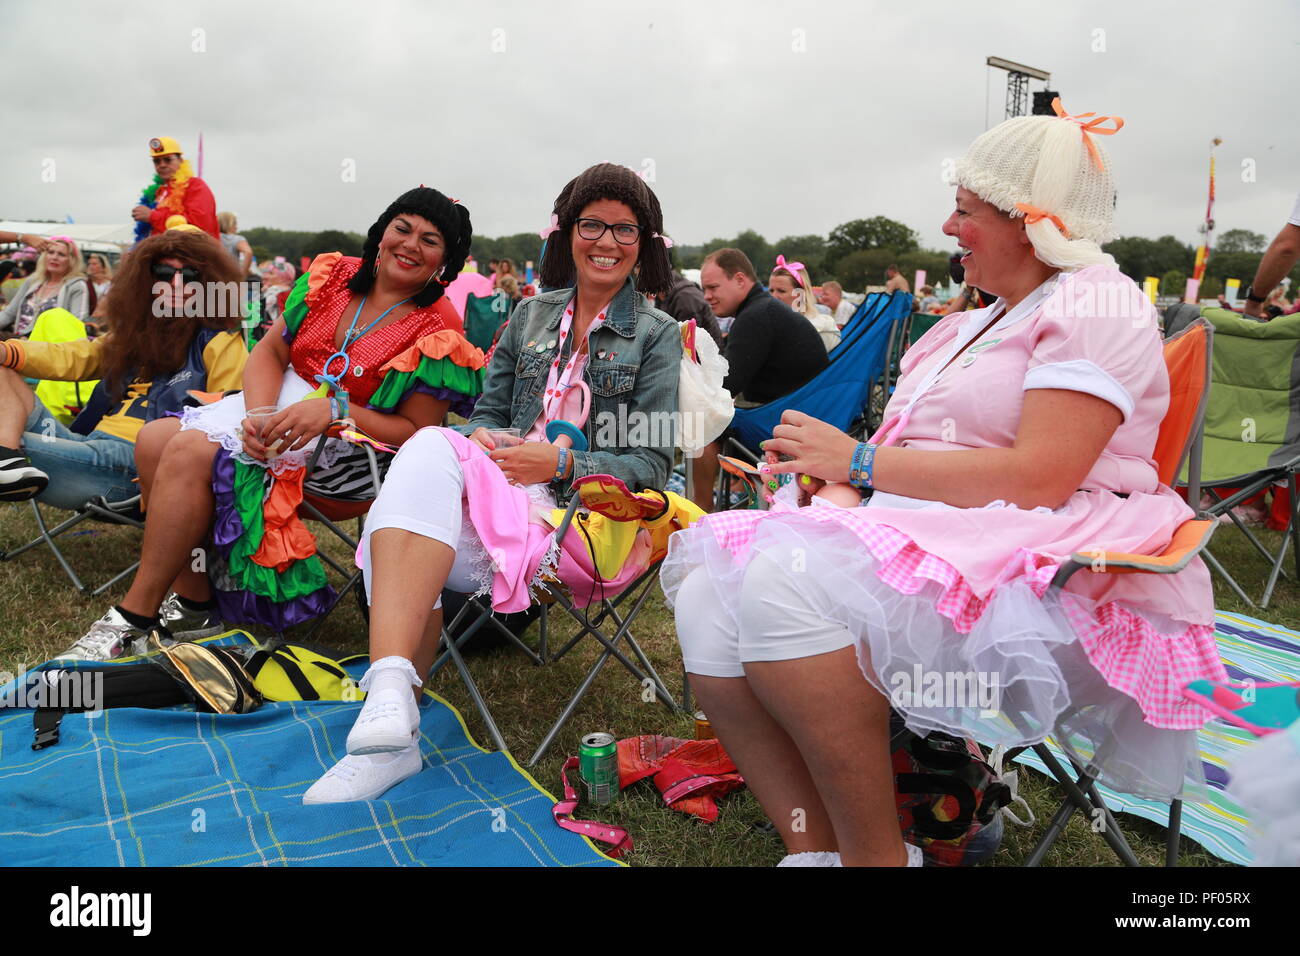 Henley-on-Thames, UK. 18th August 2018. The Rewind Festival South in  Henley-on-Thames on the first day attracted thousands of fans who dressed  up for the occasion. On stage were singers and groups from